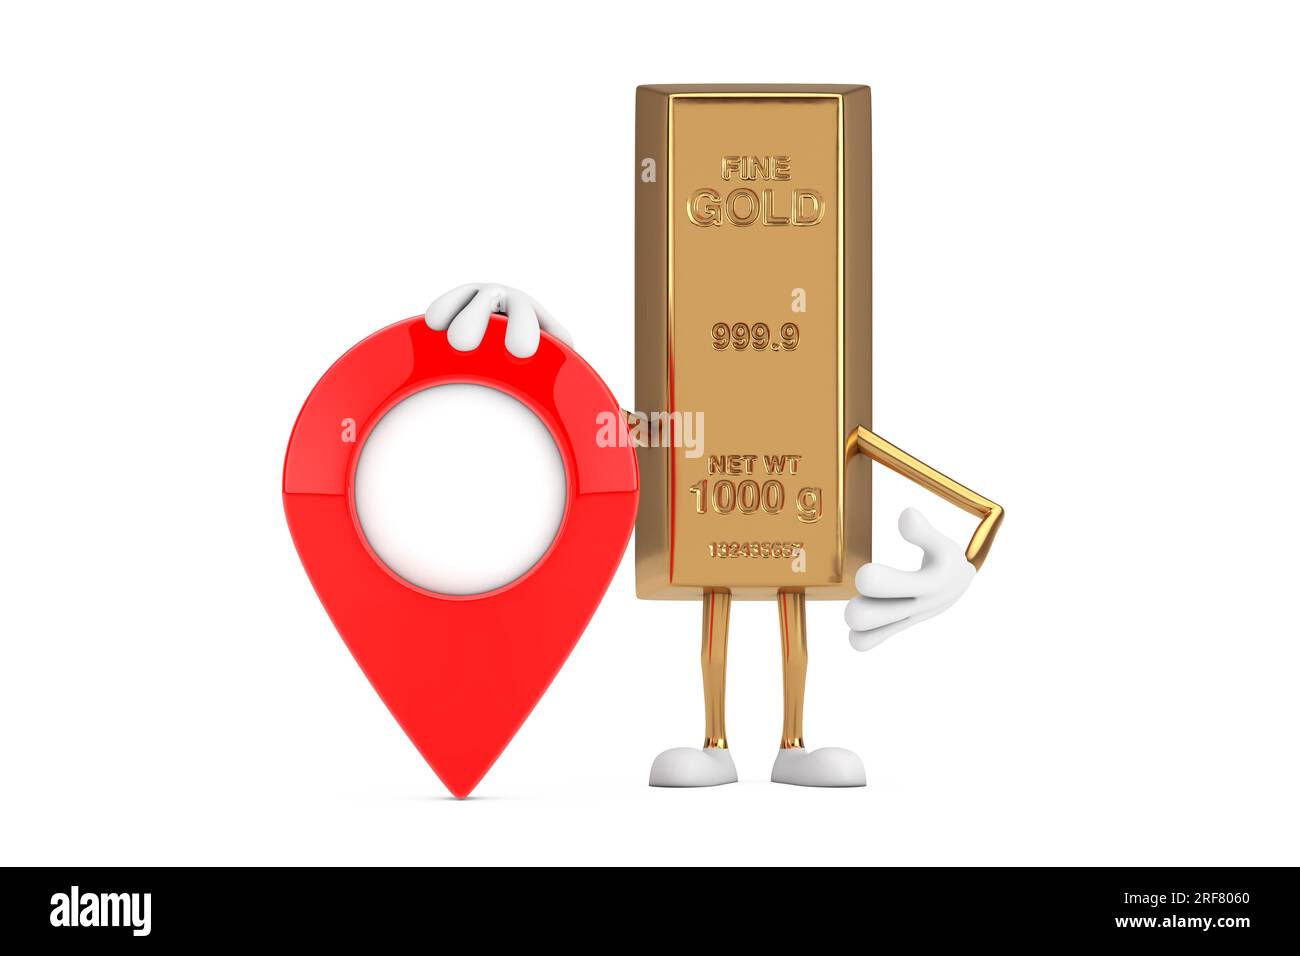 https://c8.alamy.com/comp/2RF8060/golden-bar-cartoon-person-character-mascot-with-red-target-map-pointer-pin-on-a-white-background-3d-rendering-2RF8060.jpg